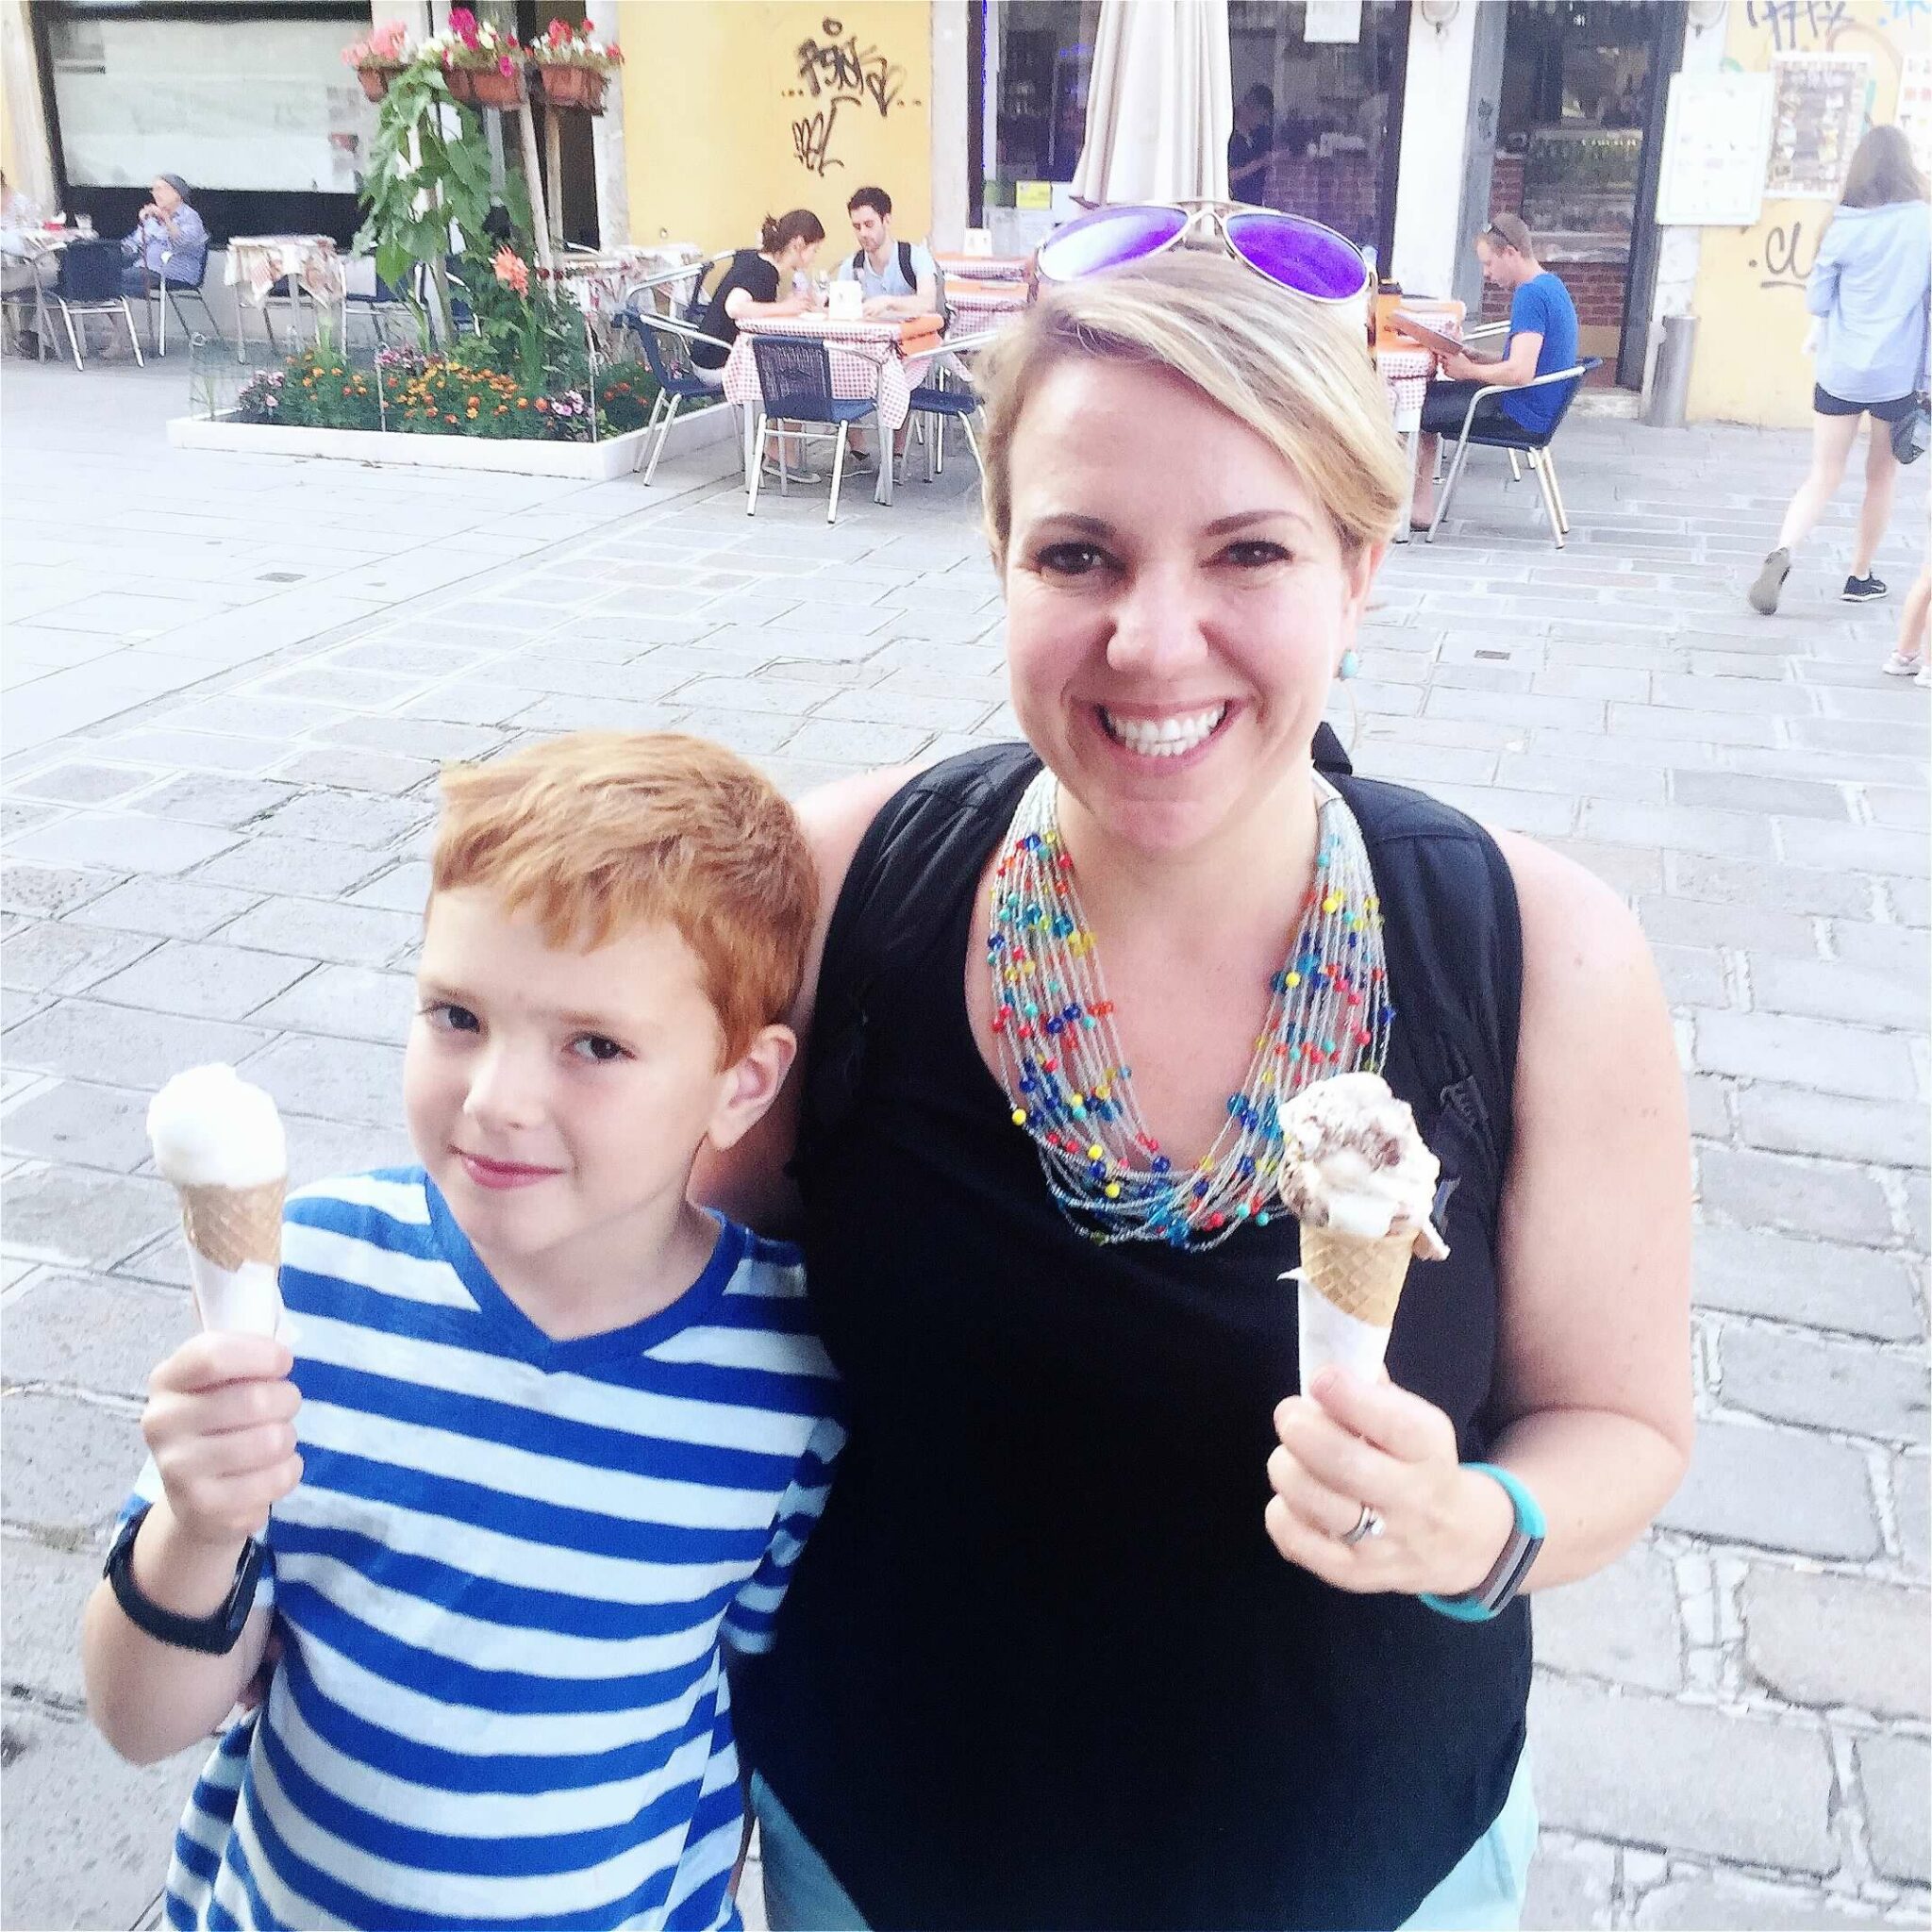 Sugar Cravings After Quitting Alcohol - Gelato Crawl In Venice With My Son at 4 Months Alcohol-Free instead of getting a carafe of wine